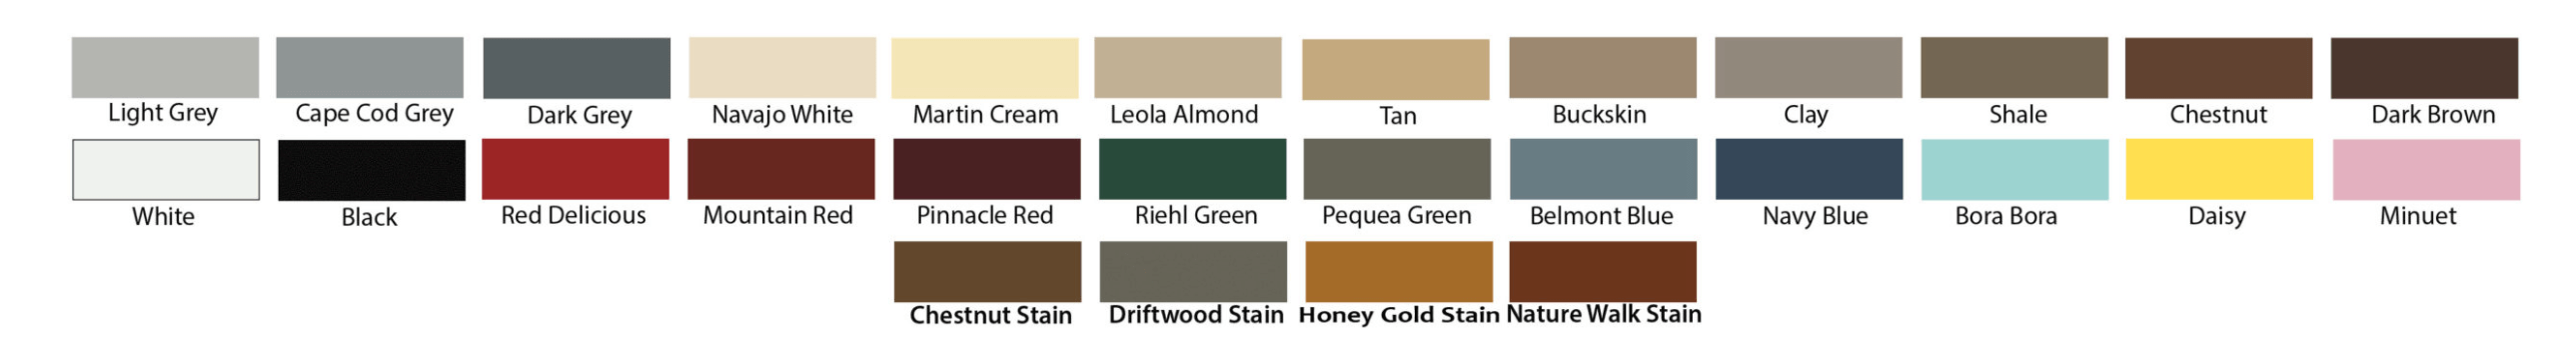 shed color palette showcasing a range of attractive color options for customers to choose from when selecting an outdoor shed